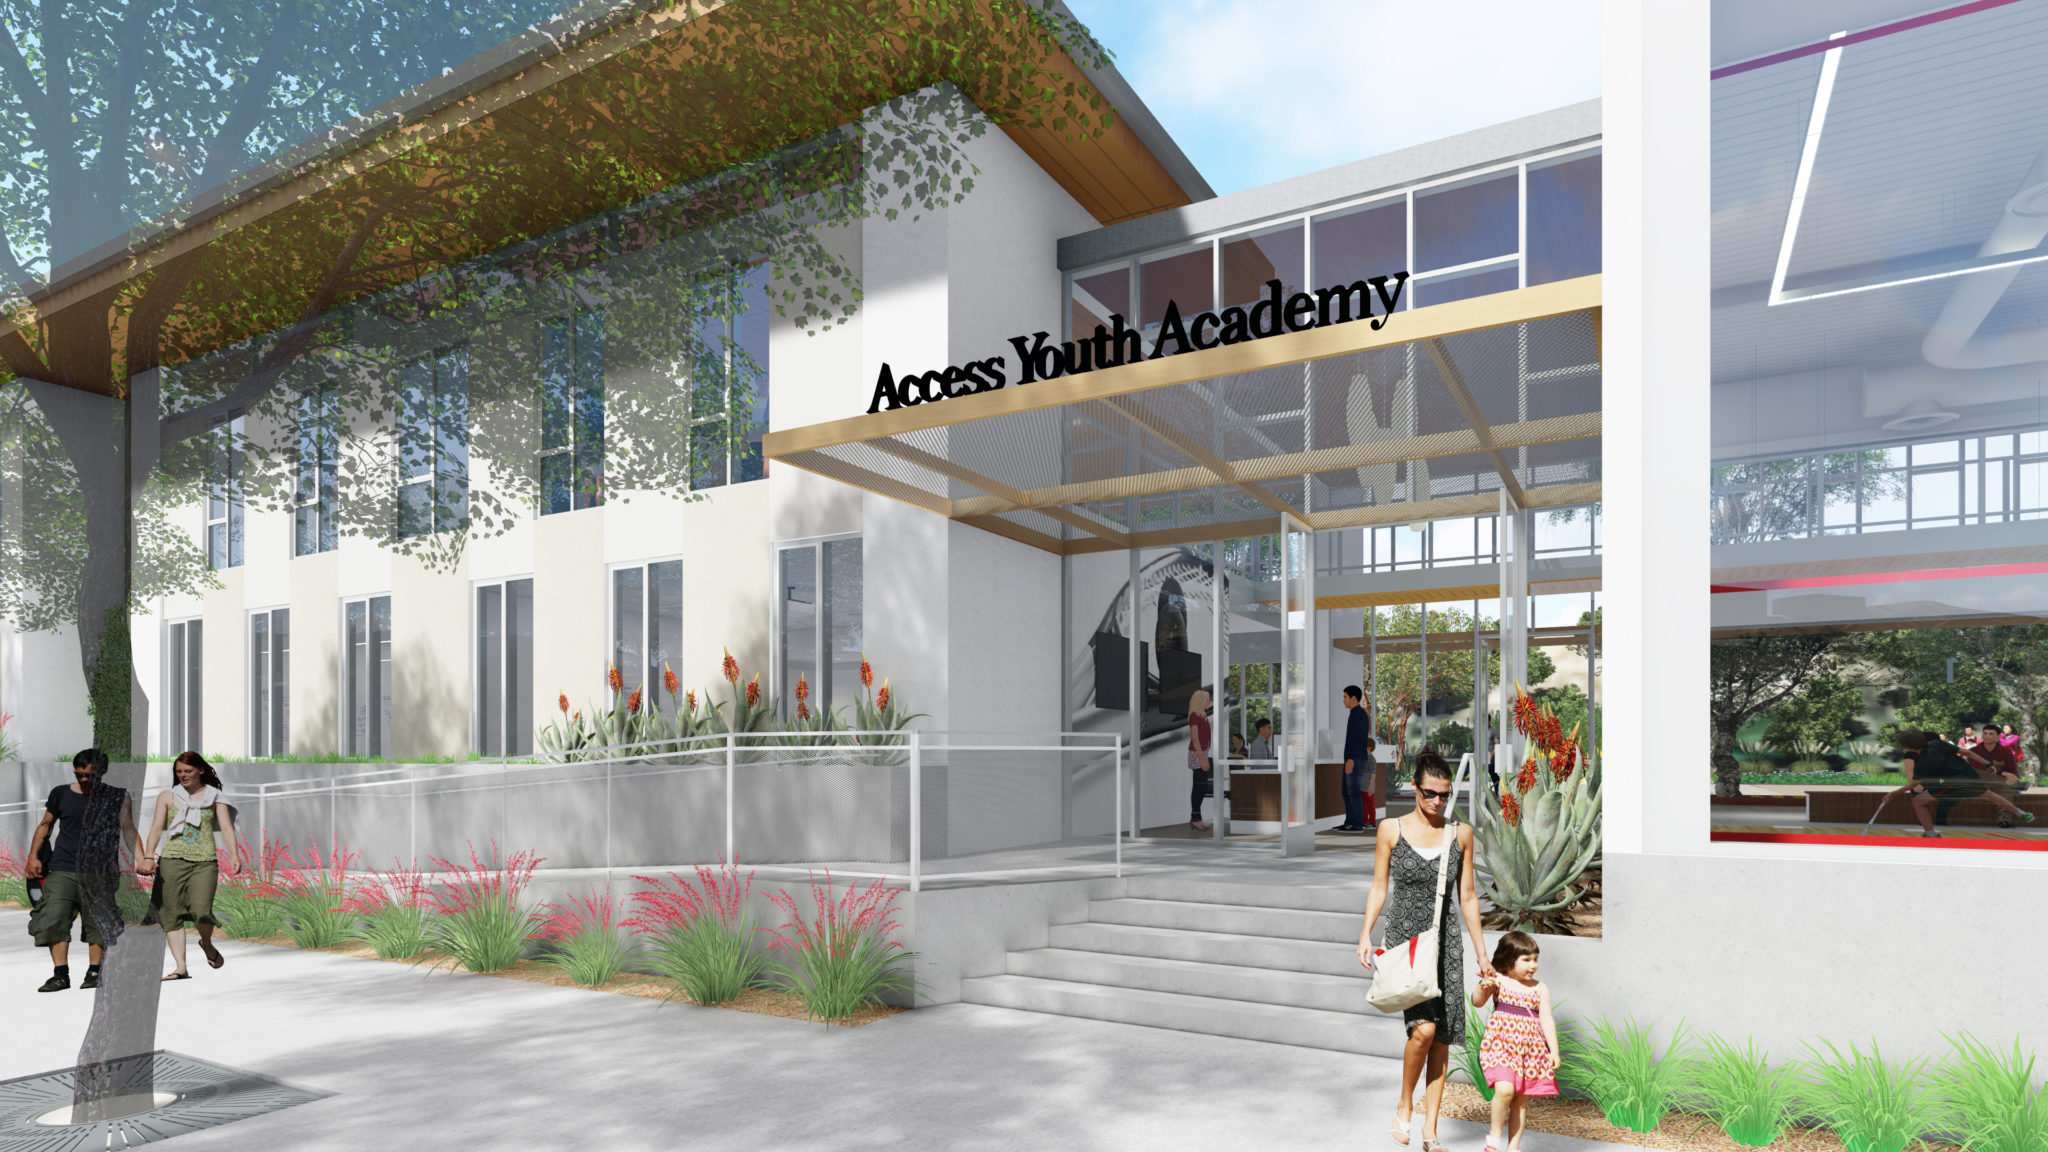 Access Youth Academy entry pavilion rendering